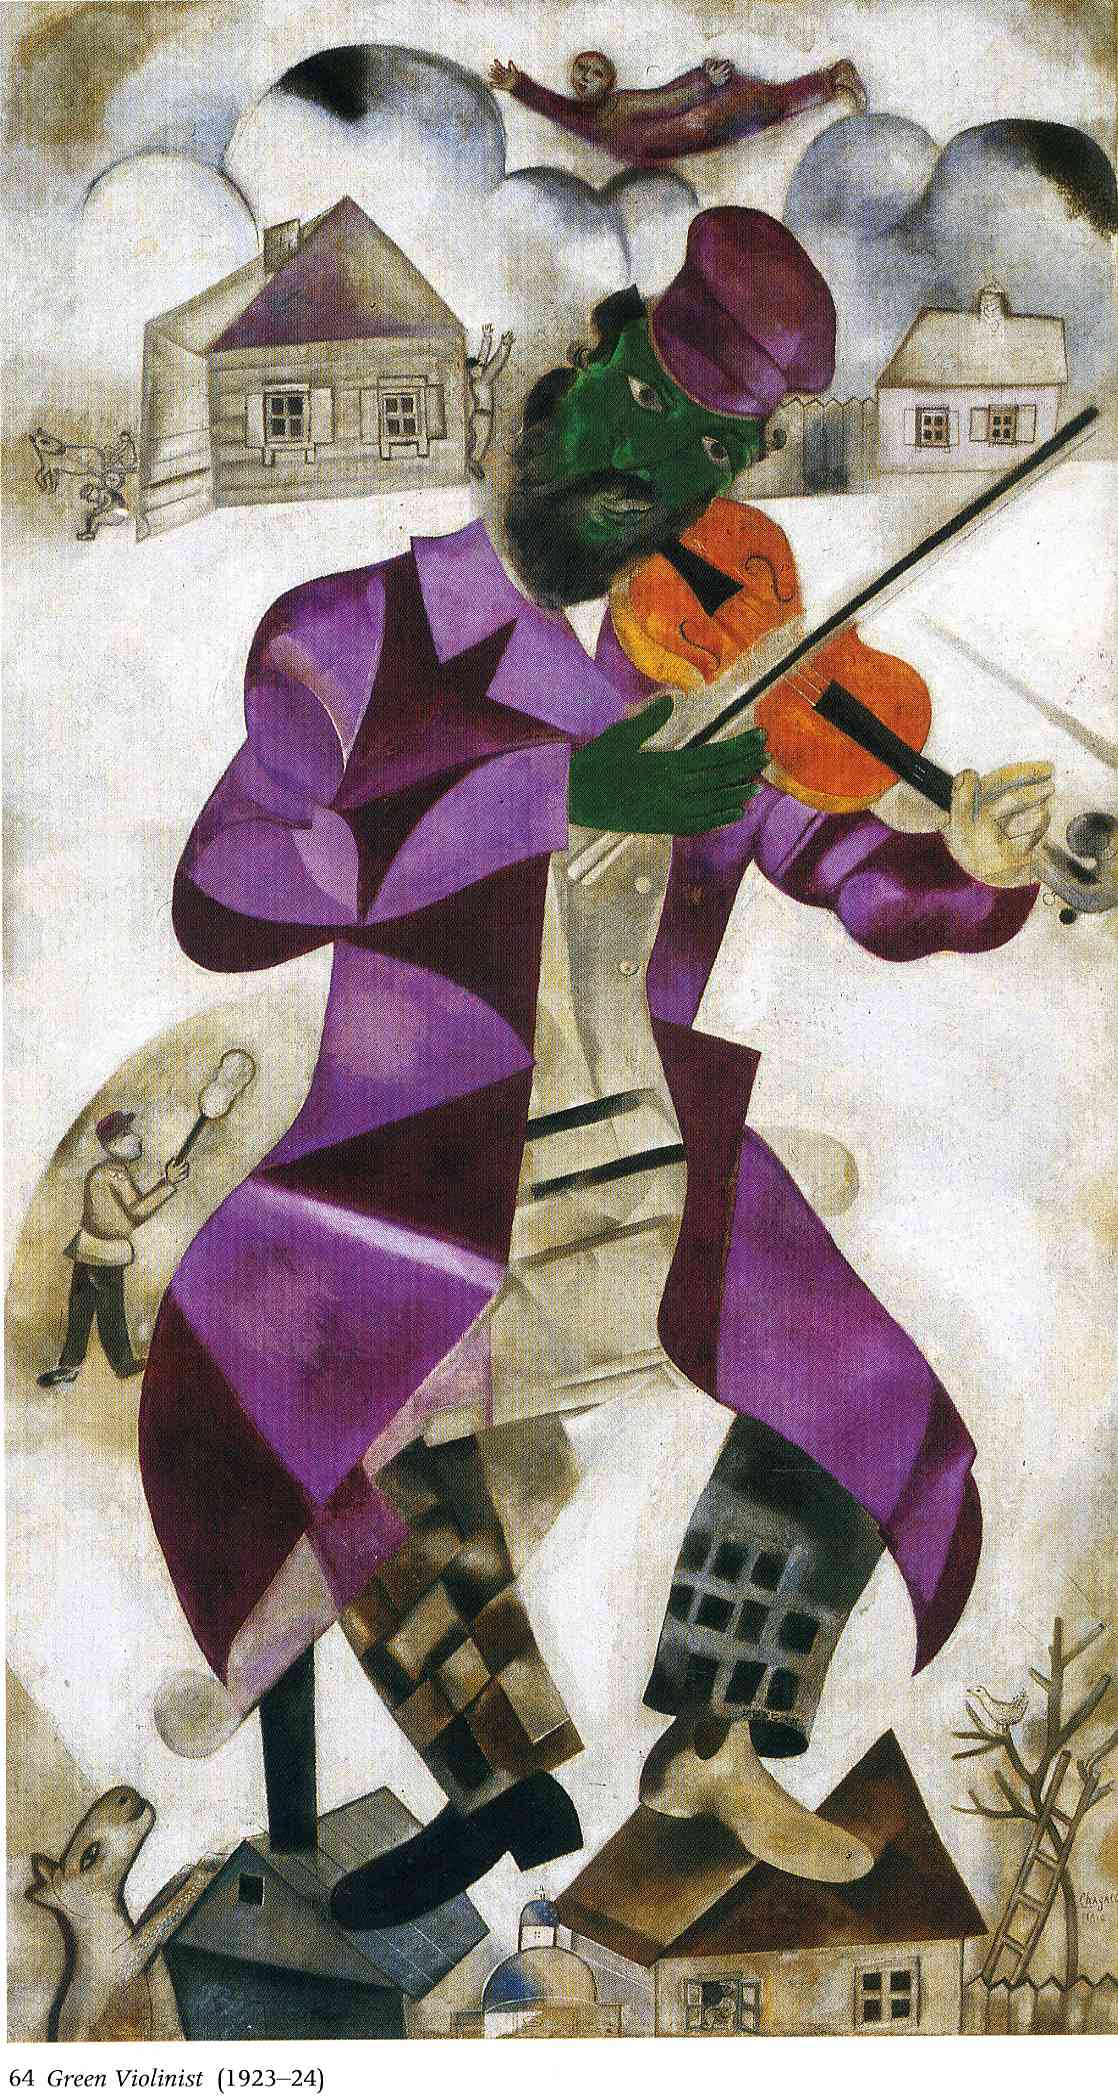 Chagall, The Green Violinist, 1923-24